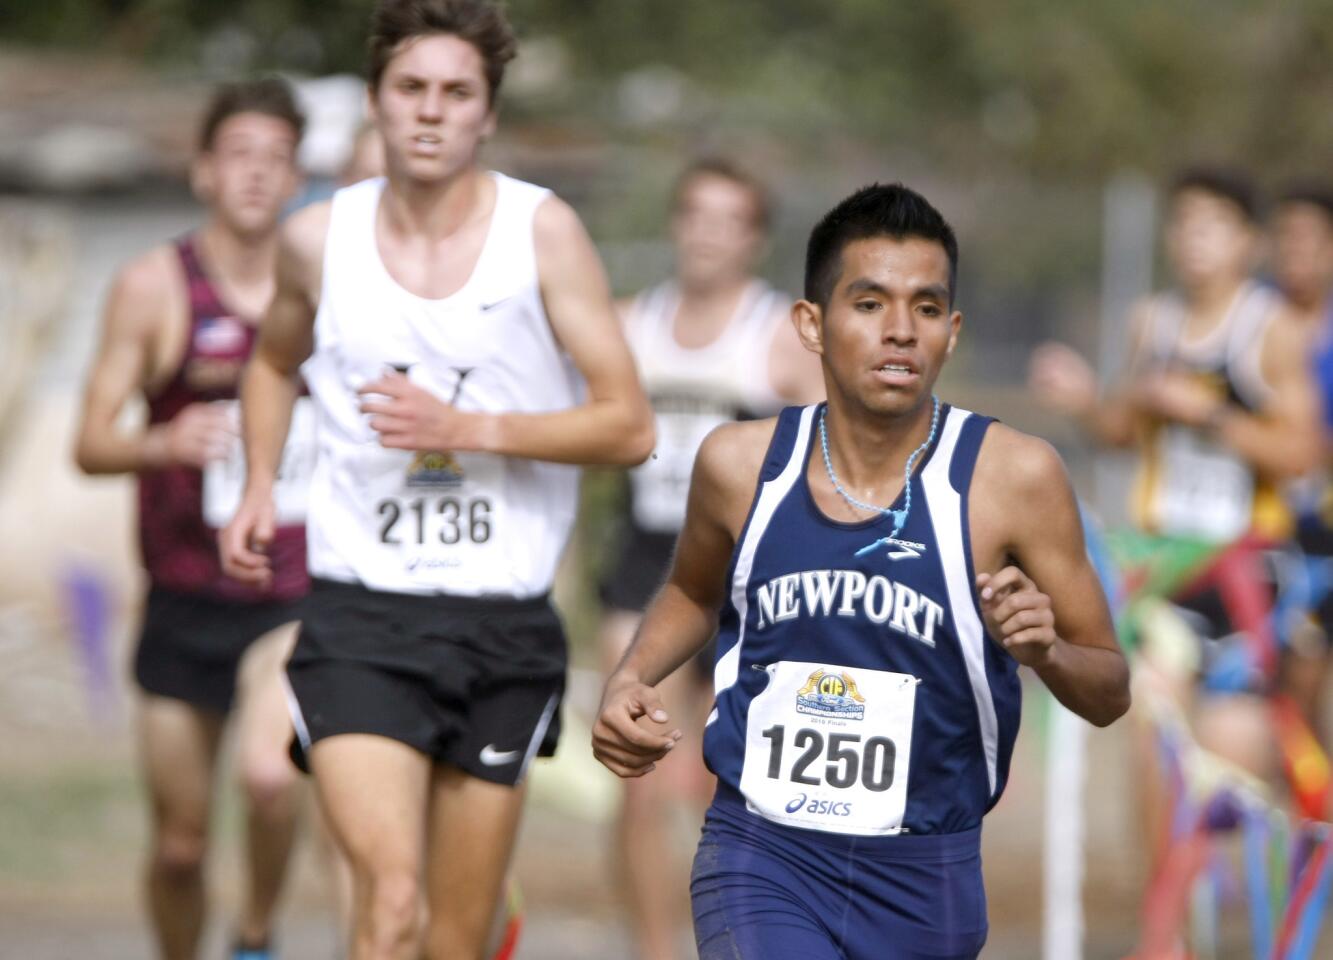 Newport Harbor High School's Alexis Garcia, #1250, ran in the Boys Division 2, CIF Southern Section Championships Cross Country Finals at Riverside City Cross Country Course in Riverside on Saturday, Nov. 19, 2016.